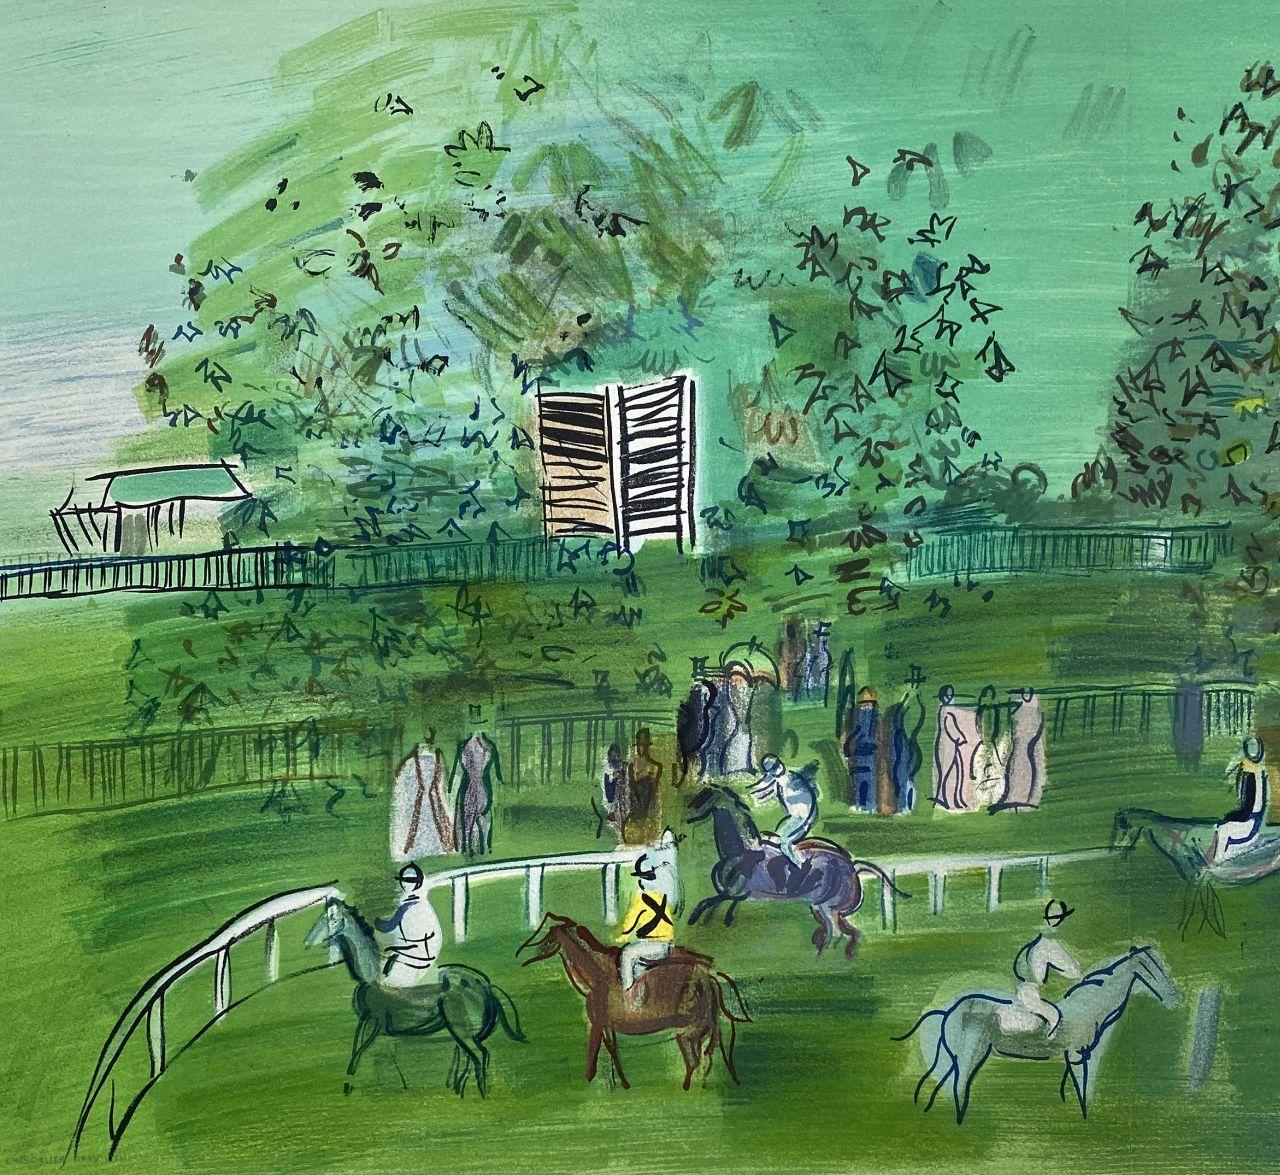 Hippodrome Ascot Racecourse - Tall Lithograph Signed in the Plate (Mourlot) - Gray Figurative Print by Raoul Dufy